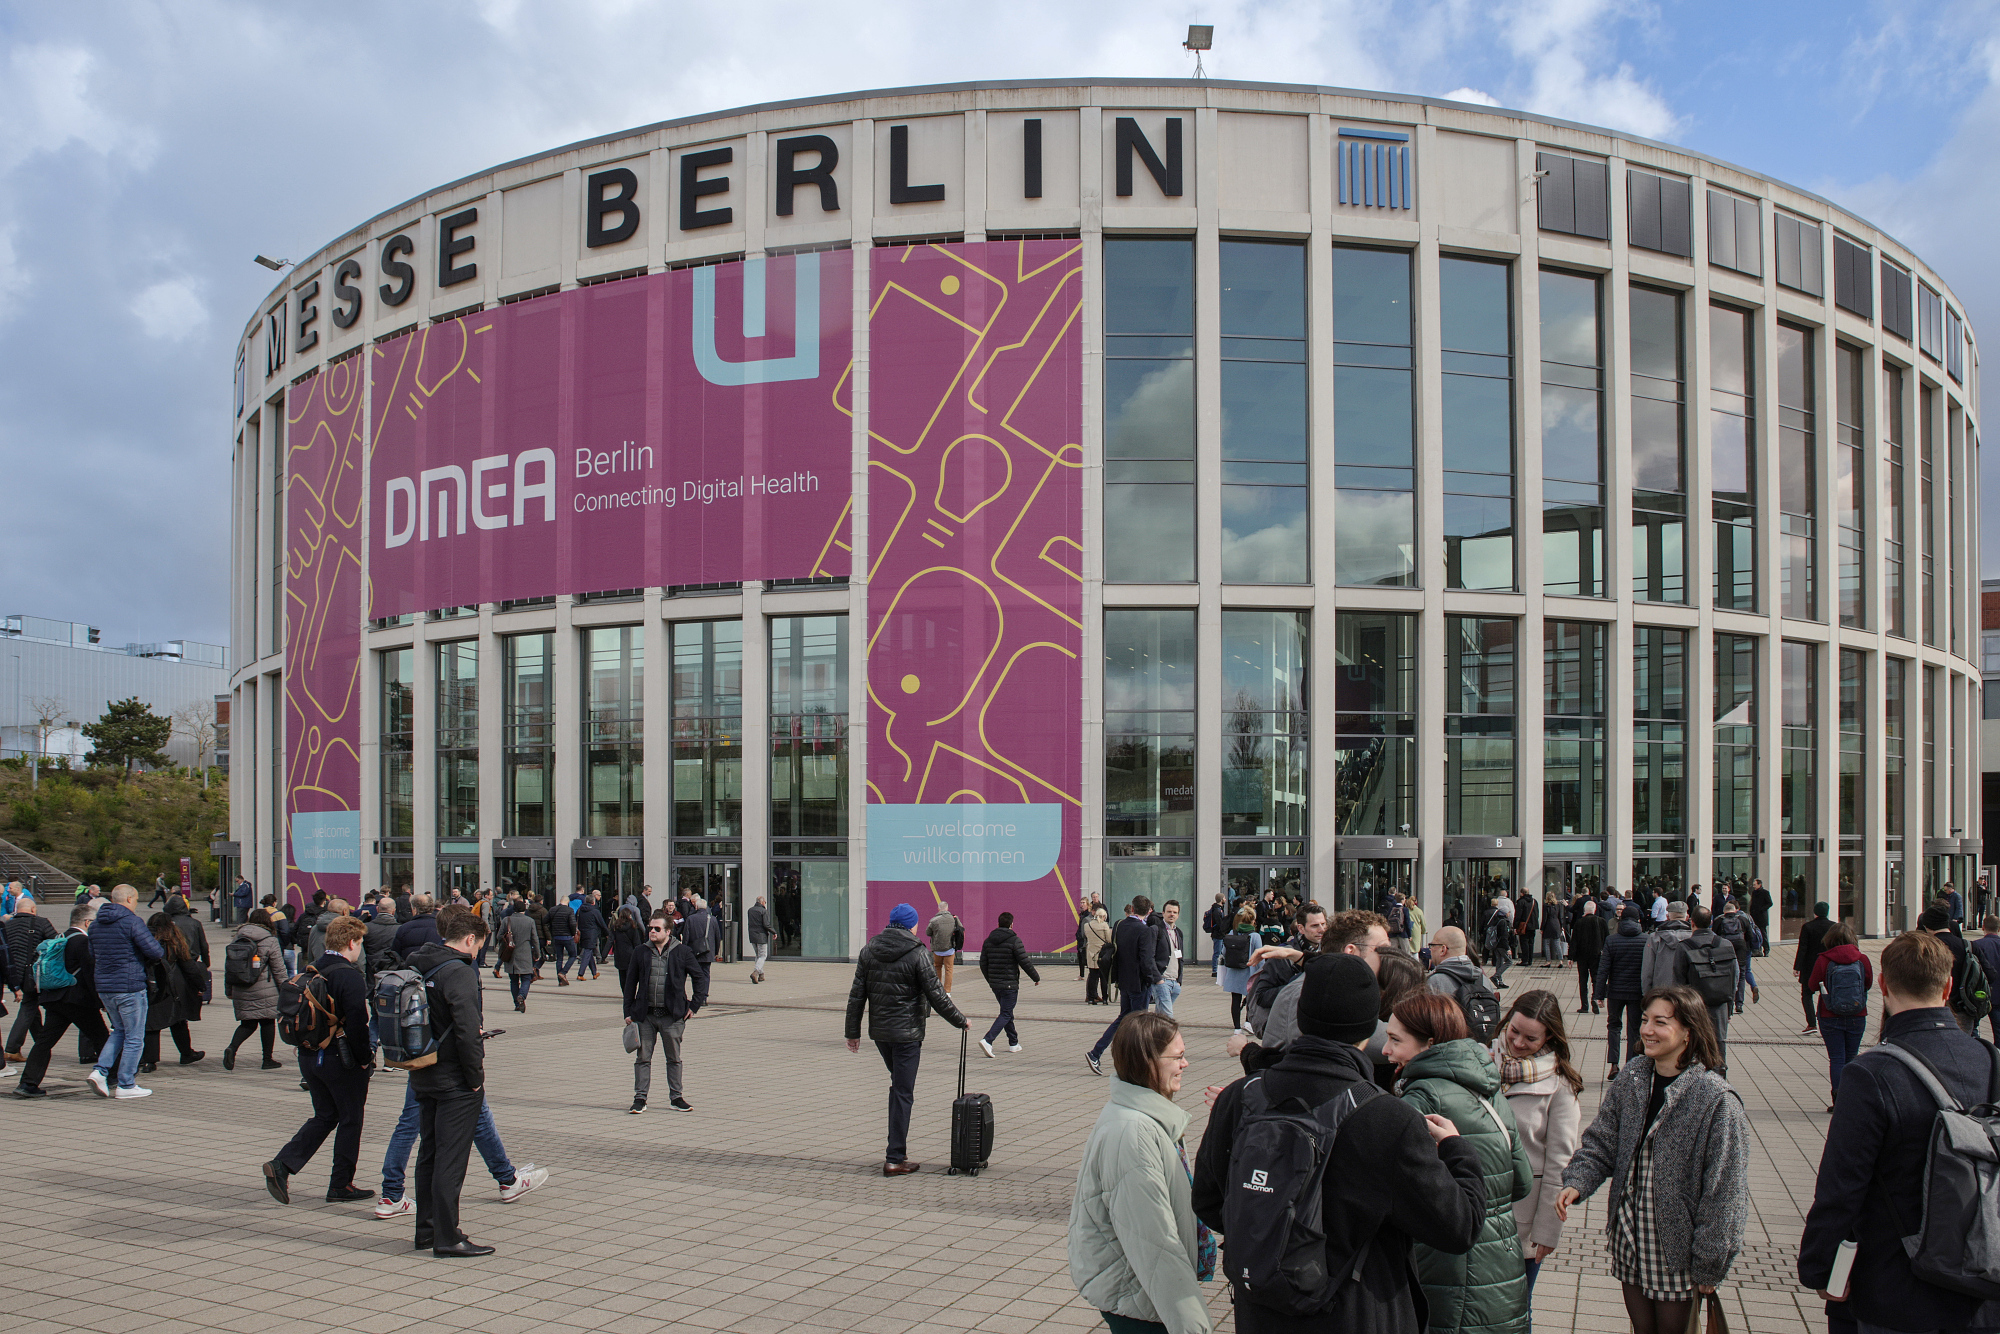 Messe Berlin south entrance, with a large DMEA banner and visitors in the foreground 